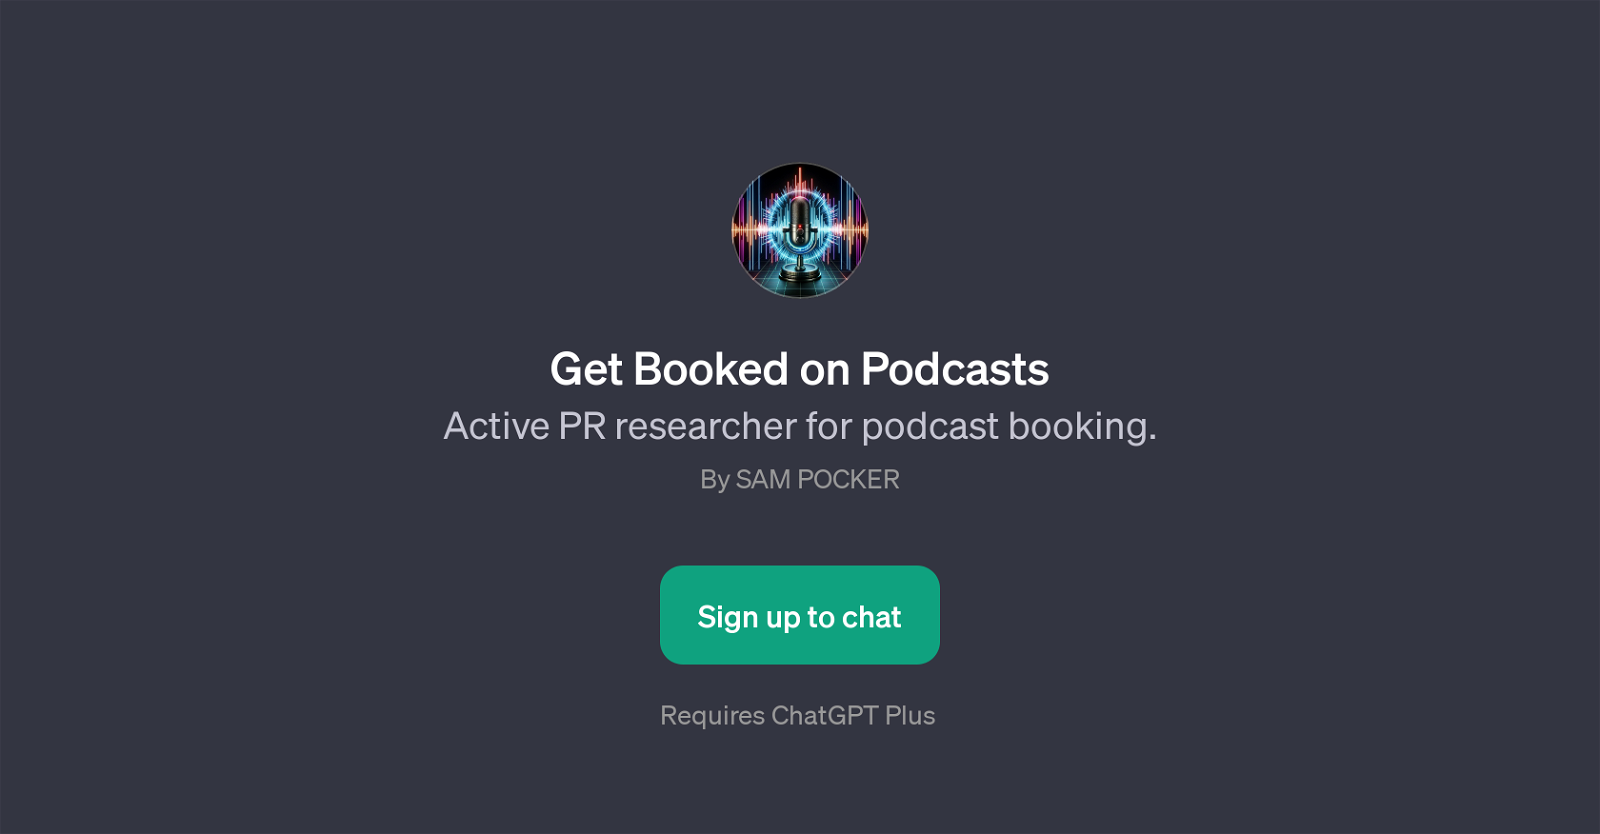 Get Booked on Podcasts website